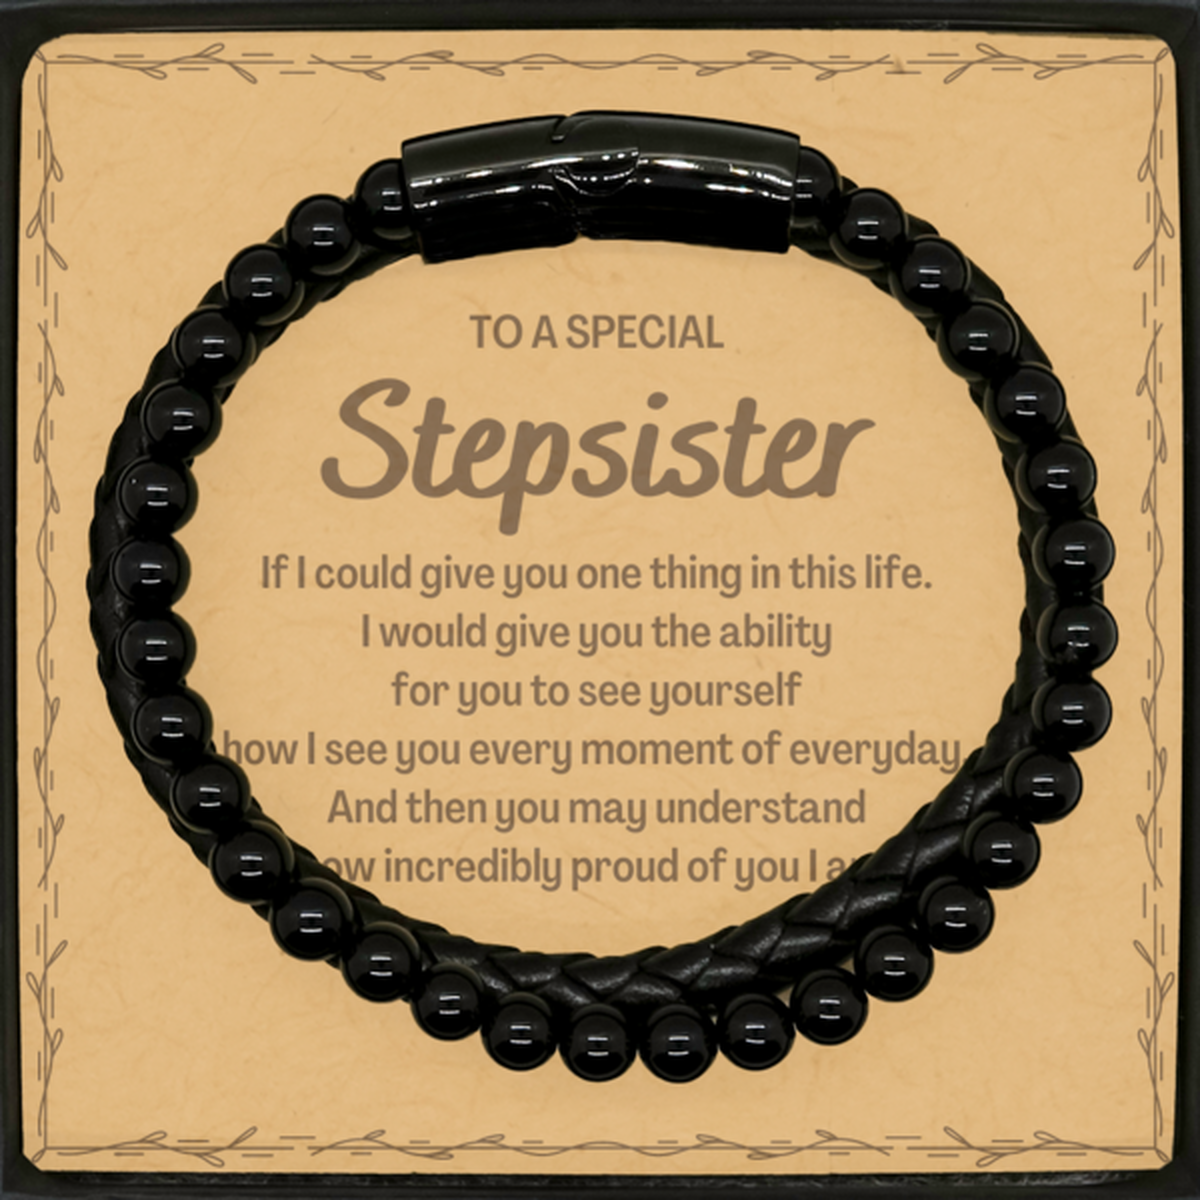 To My Stepsister Stone Leather Bracelets, Gifts For Stepsister Message Card, Inspirational Gifts for Christmas Birthday, Epic Gifts for Stepsister To A Special Stepsister how incredibly proud of you I am